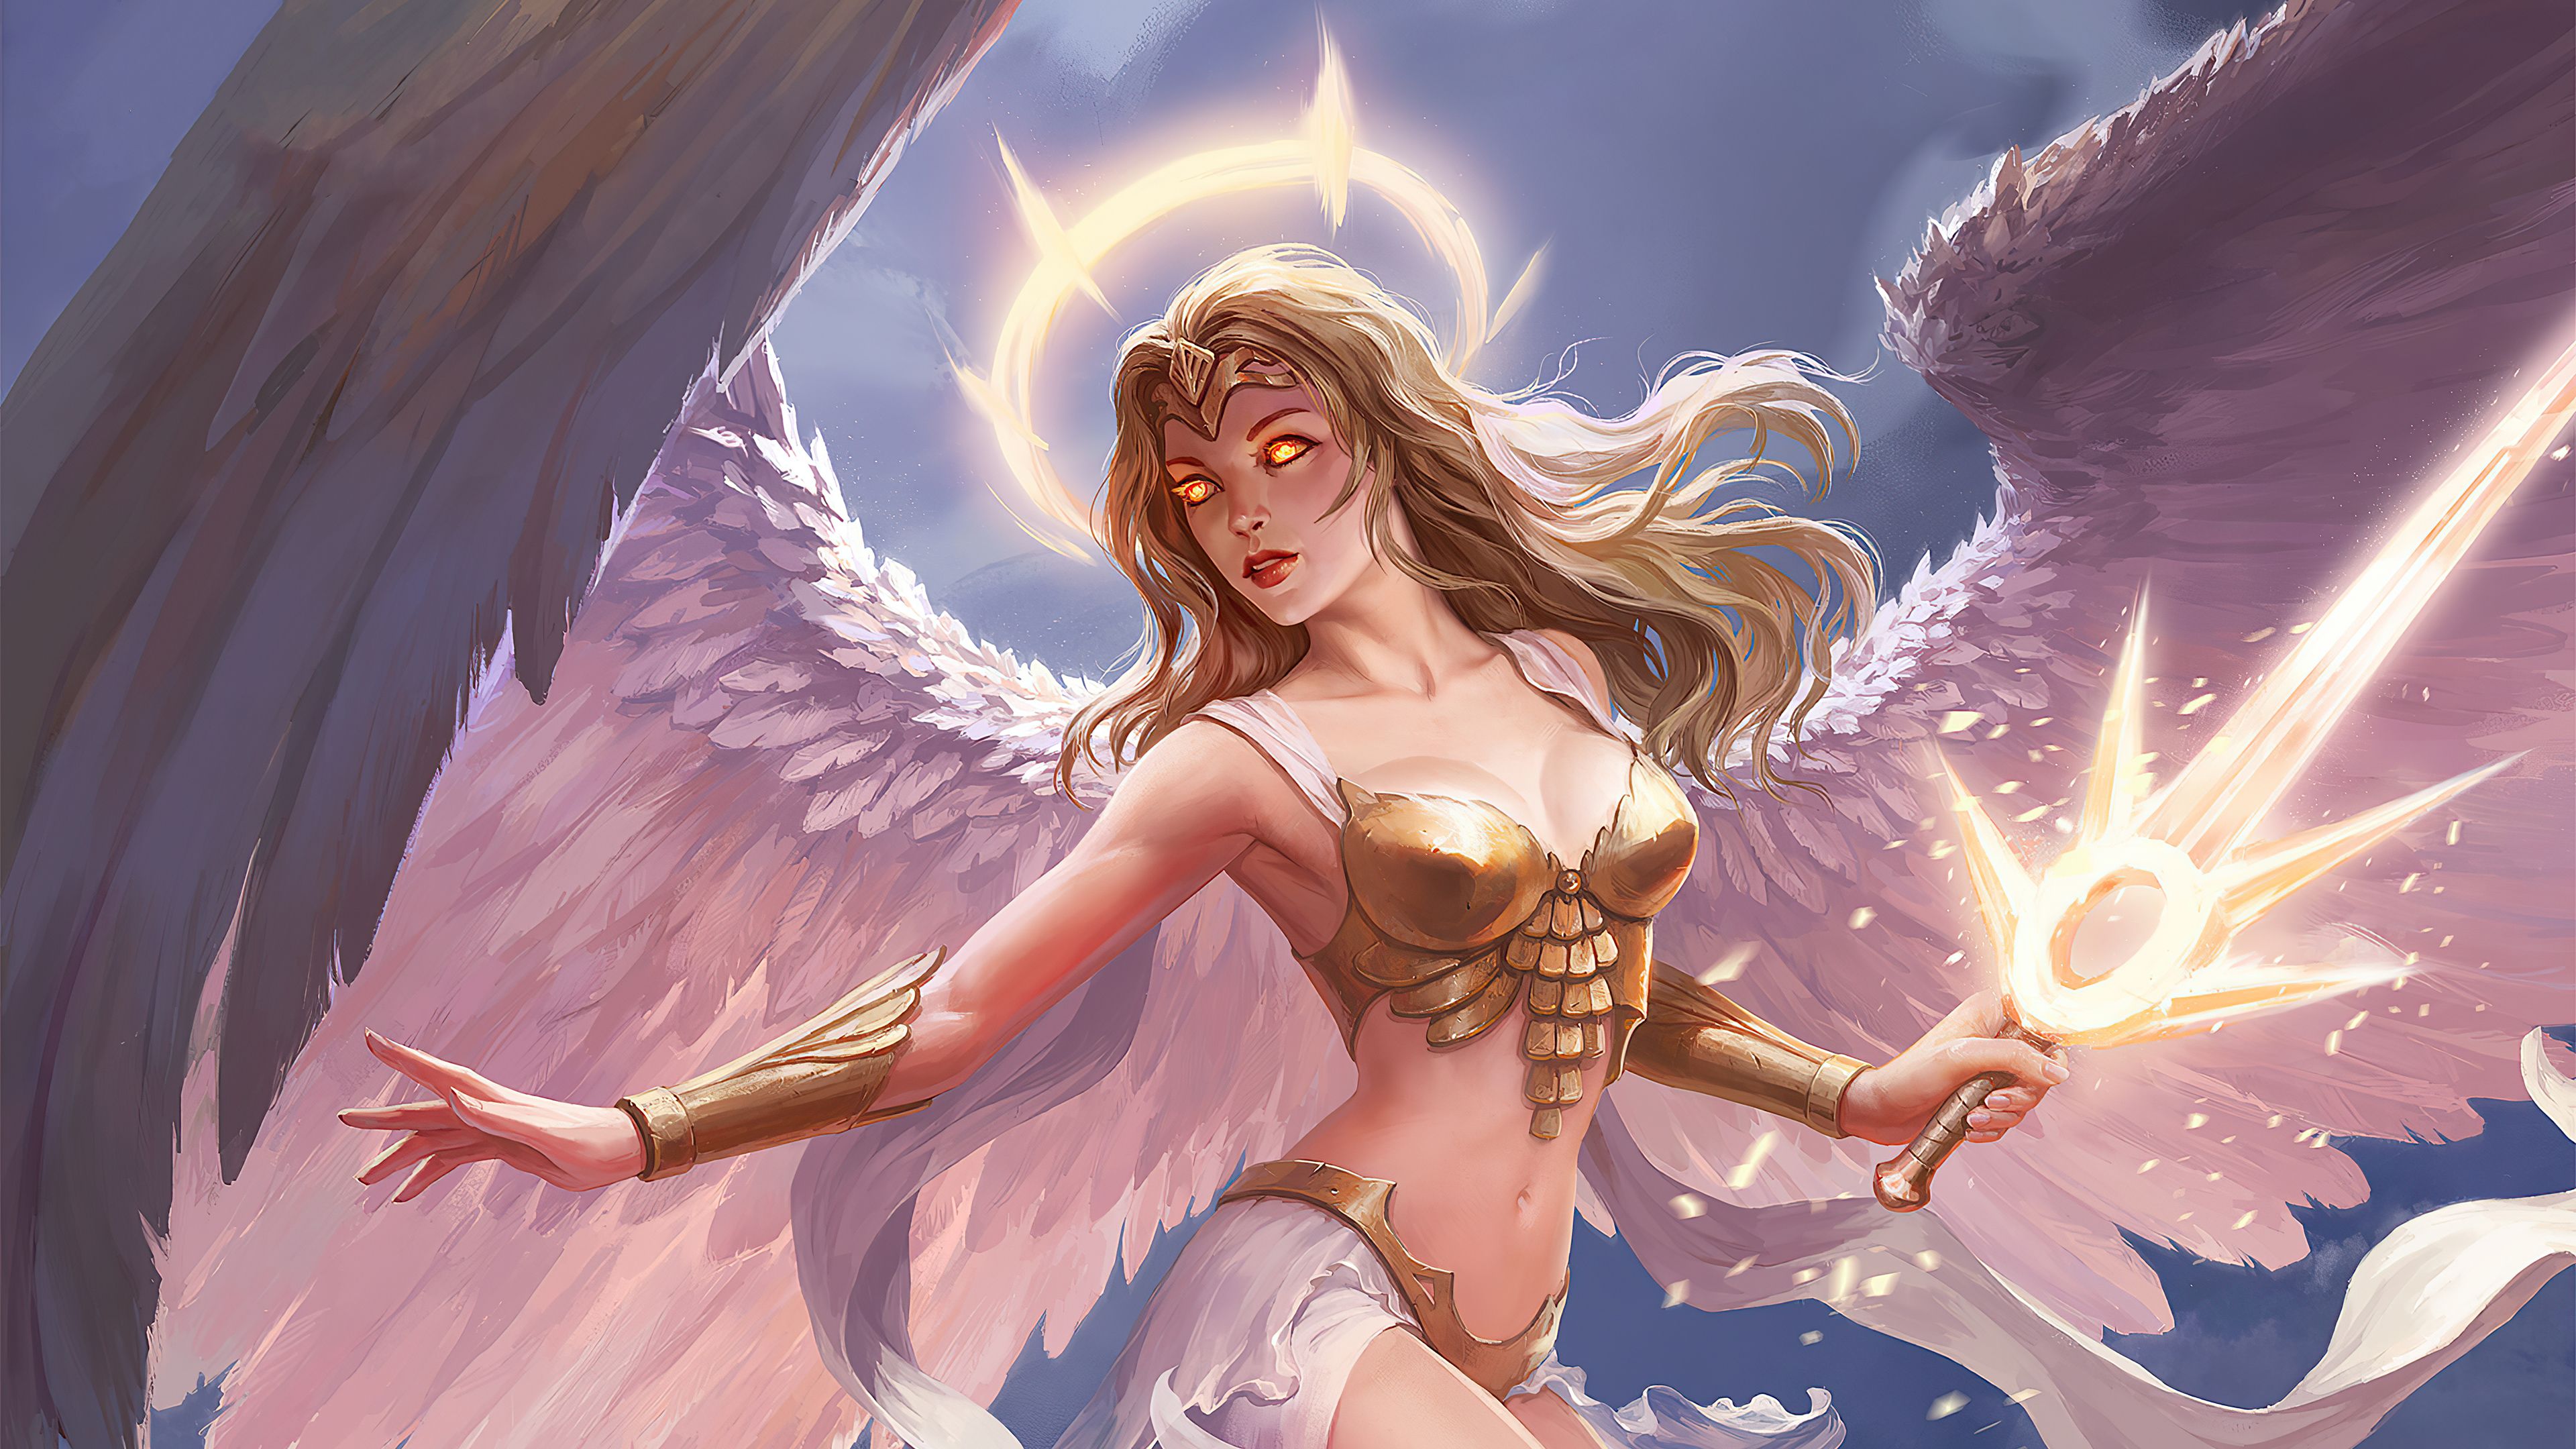 Angel And The Demon 4k, HD Artist, 4k Wallpapers, Image, Backgrounds, Photo...